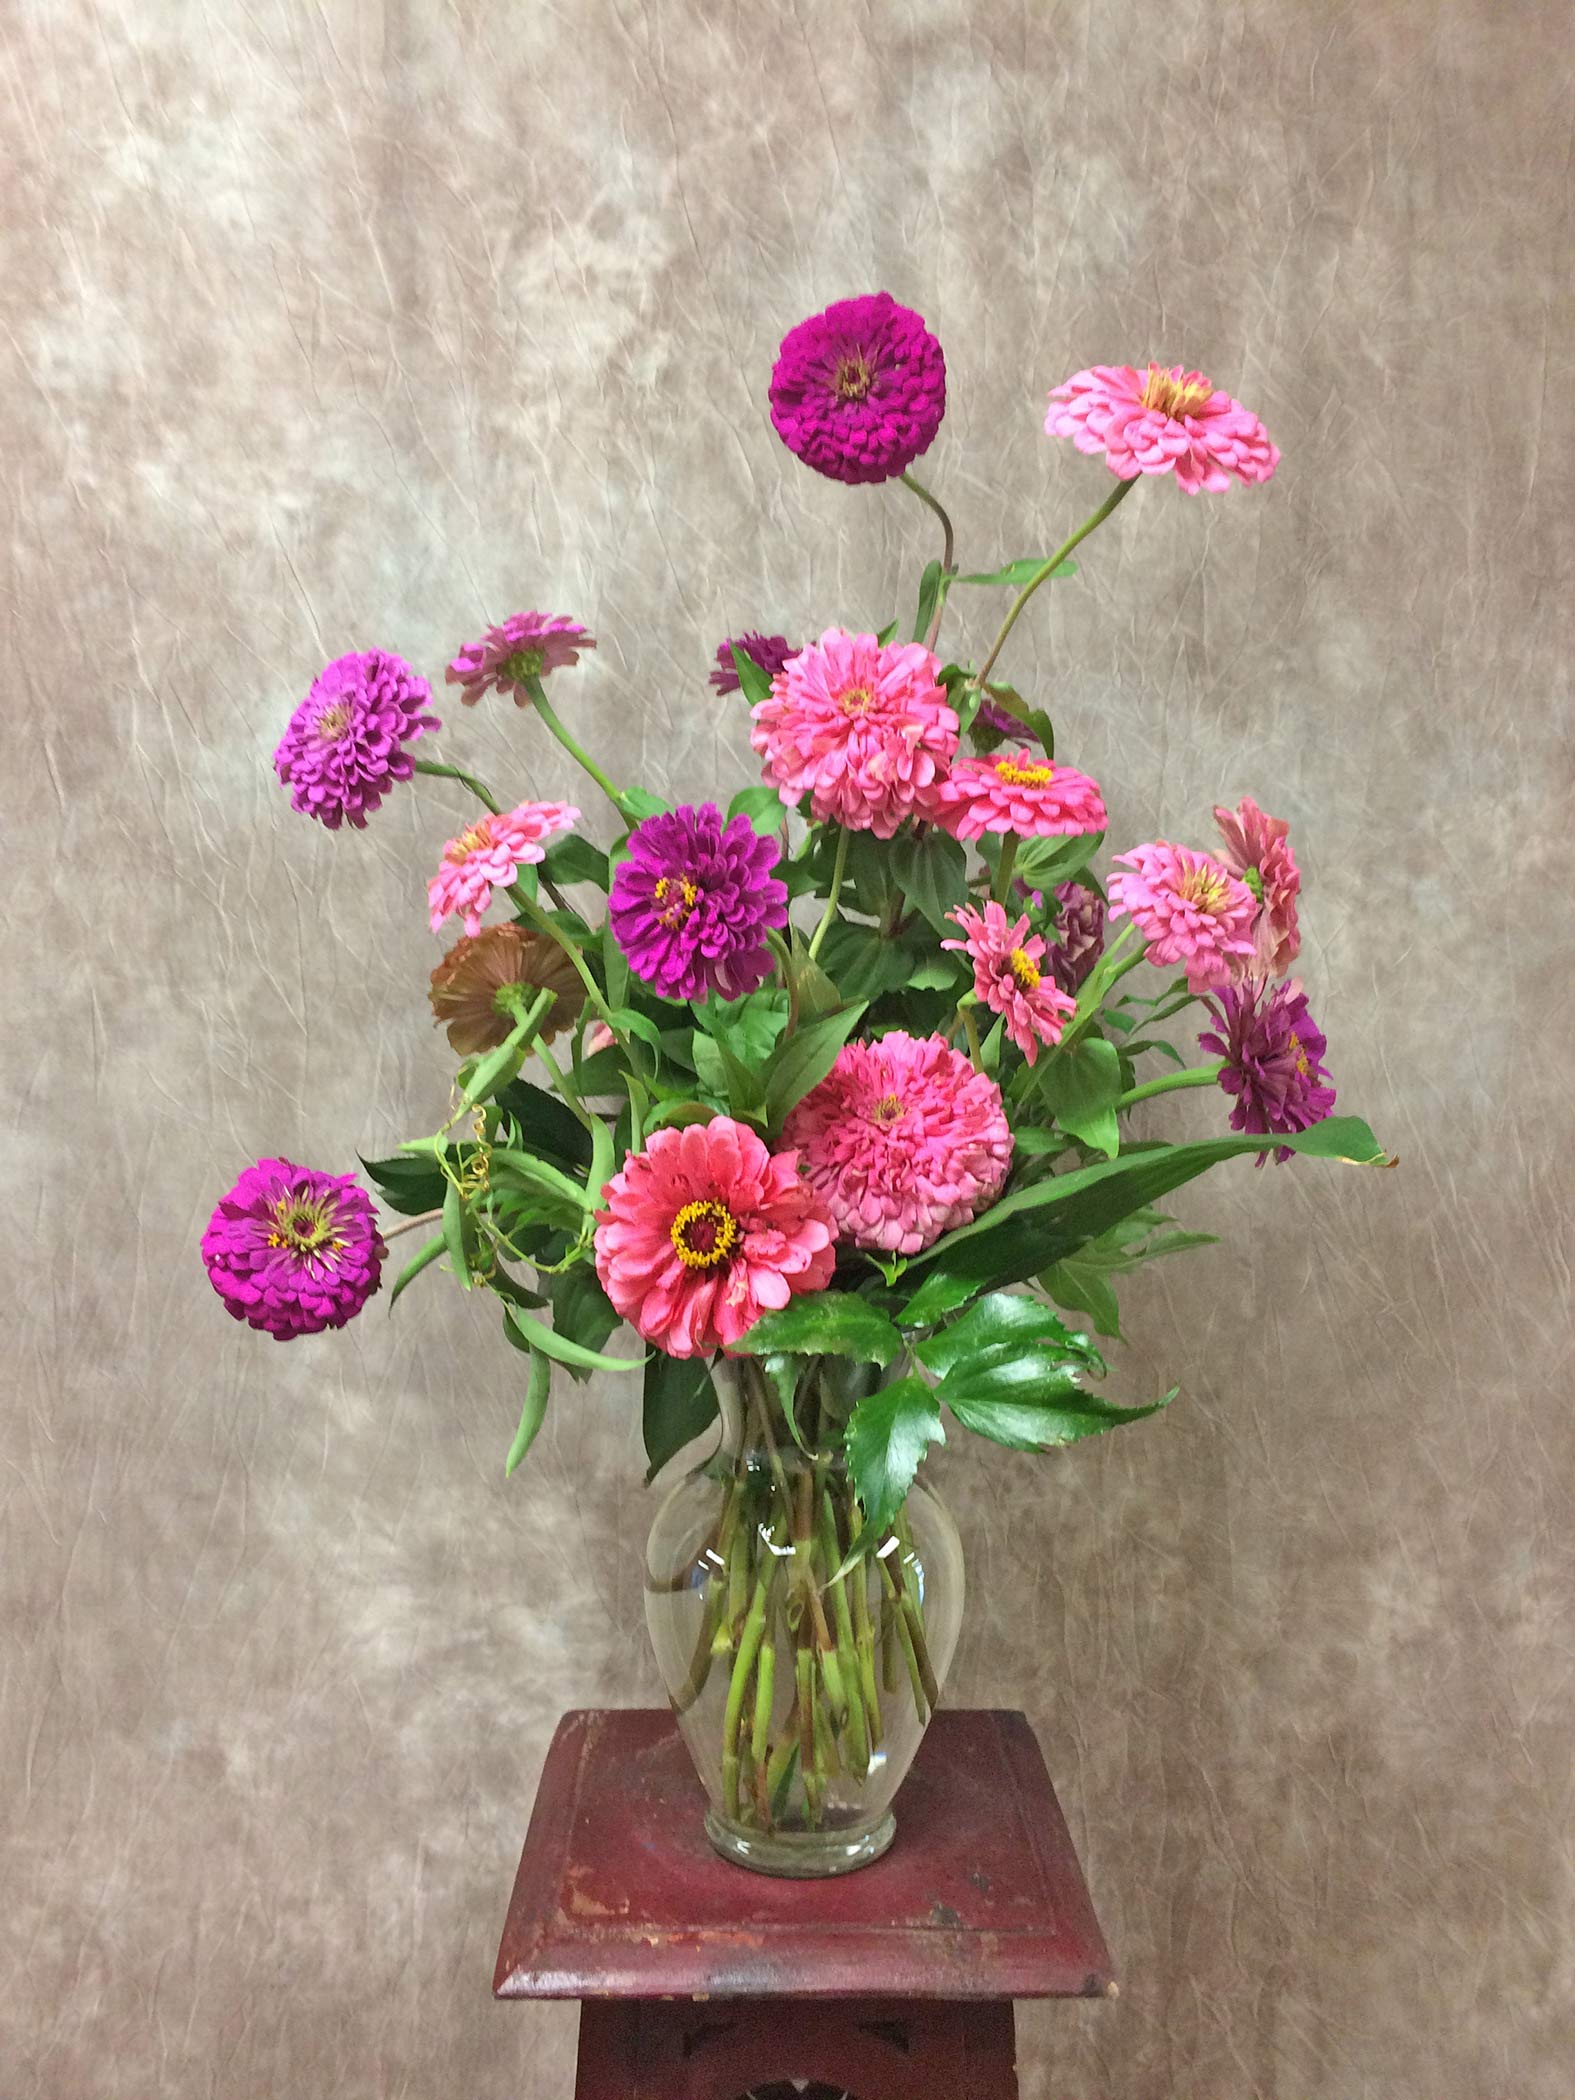 An arrangement of pink and violet zinnias in a glass vase.